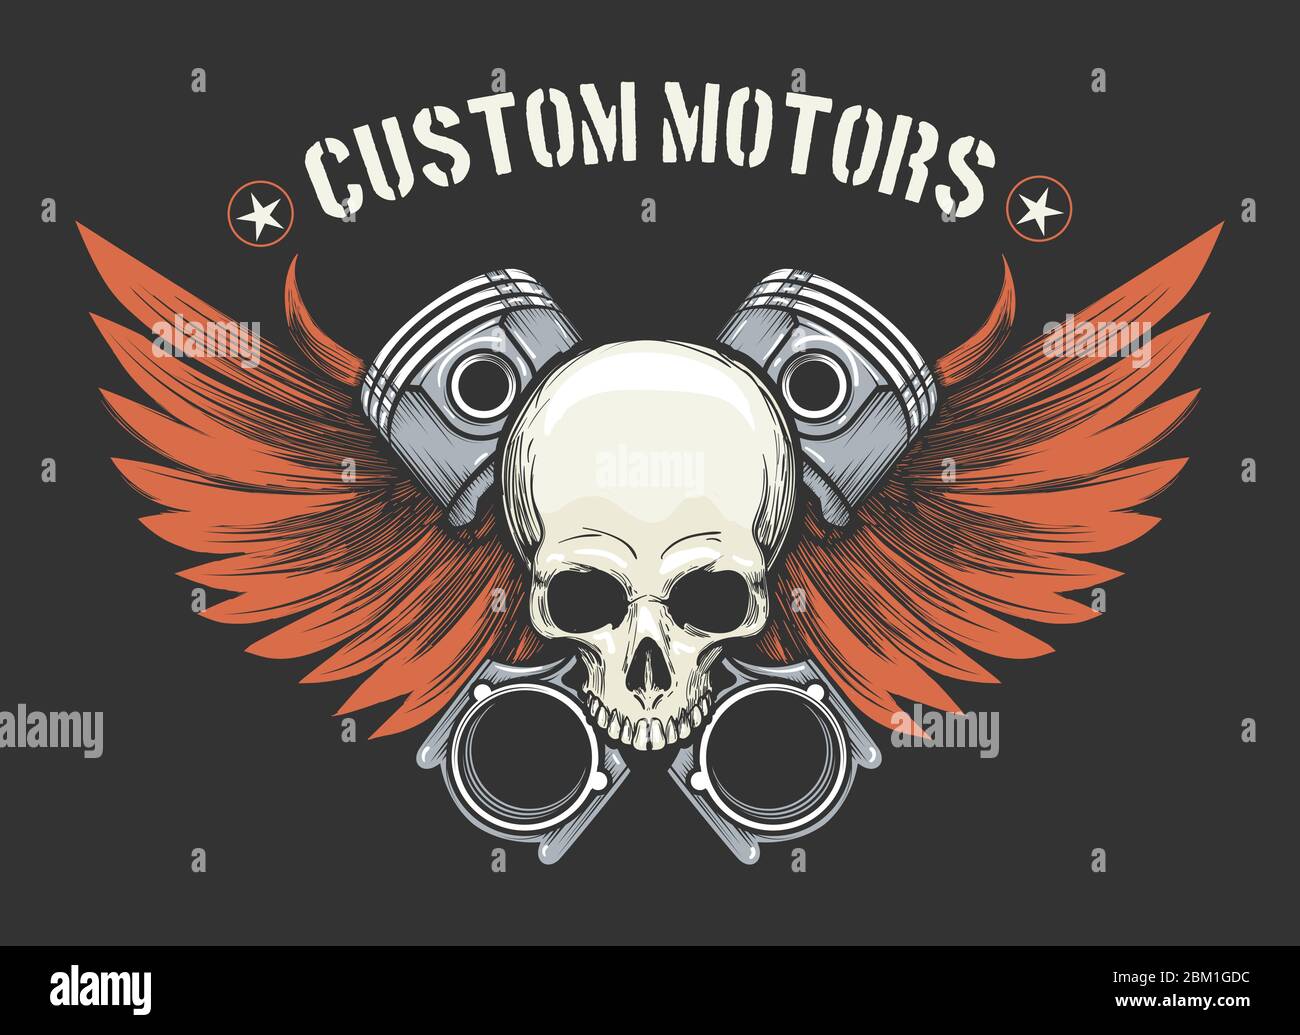 Skull with wings and crossed pistons illustration. Biker club or motorcycle workshop emblem template. Vector illustration. Stock Vector